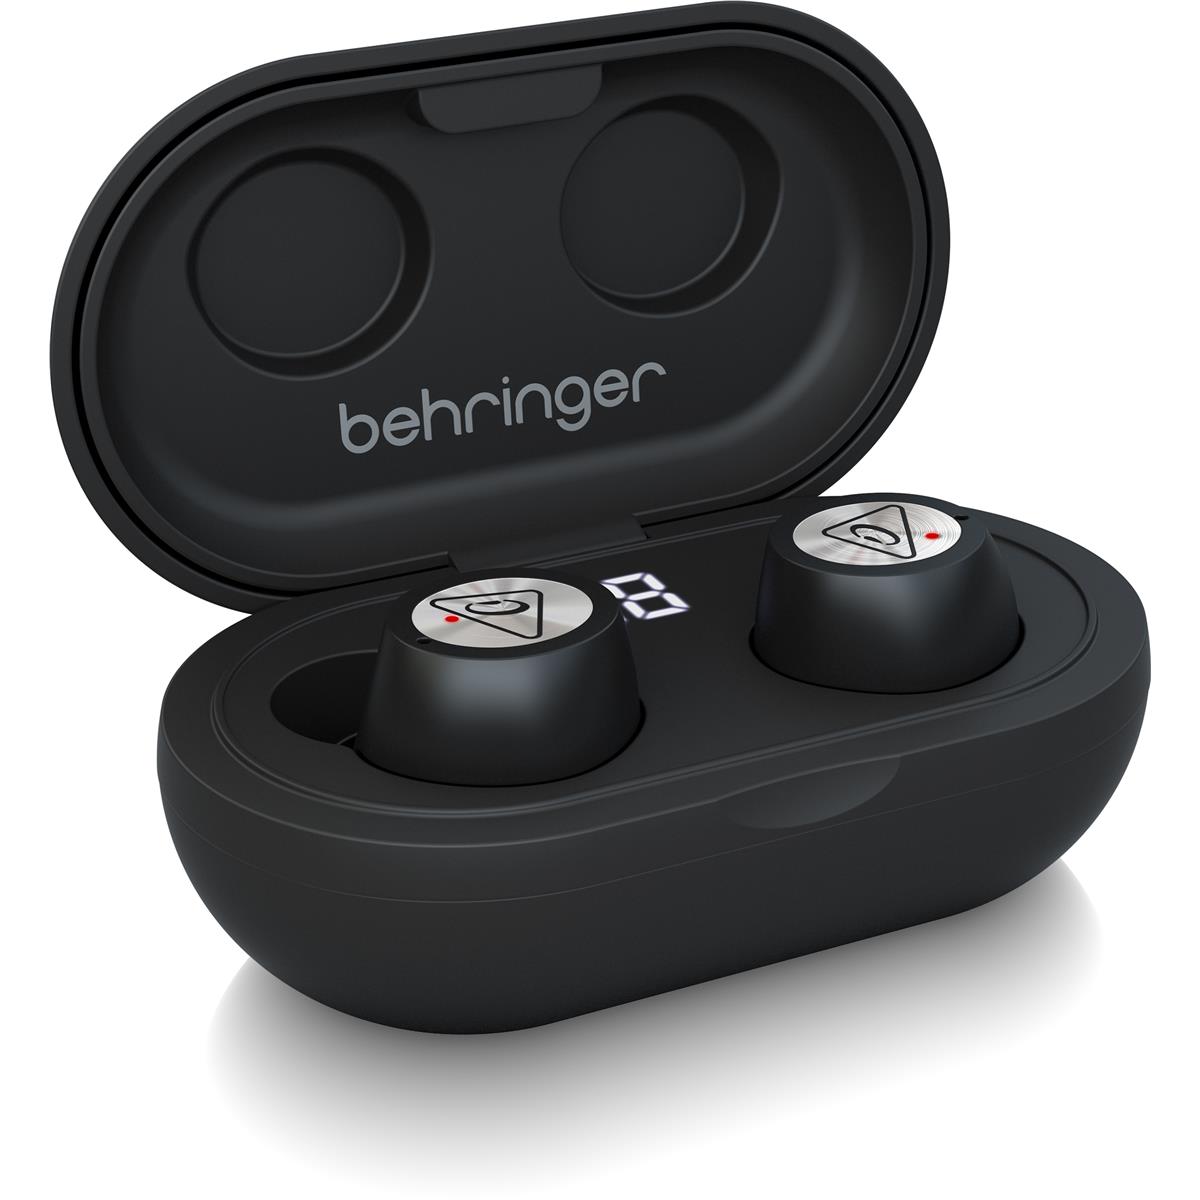 Image of Behringer True Buds Audiophile Wireless Earbuds